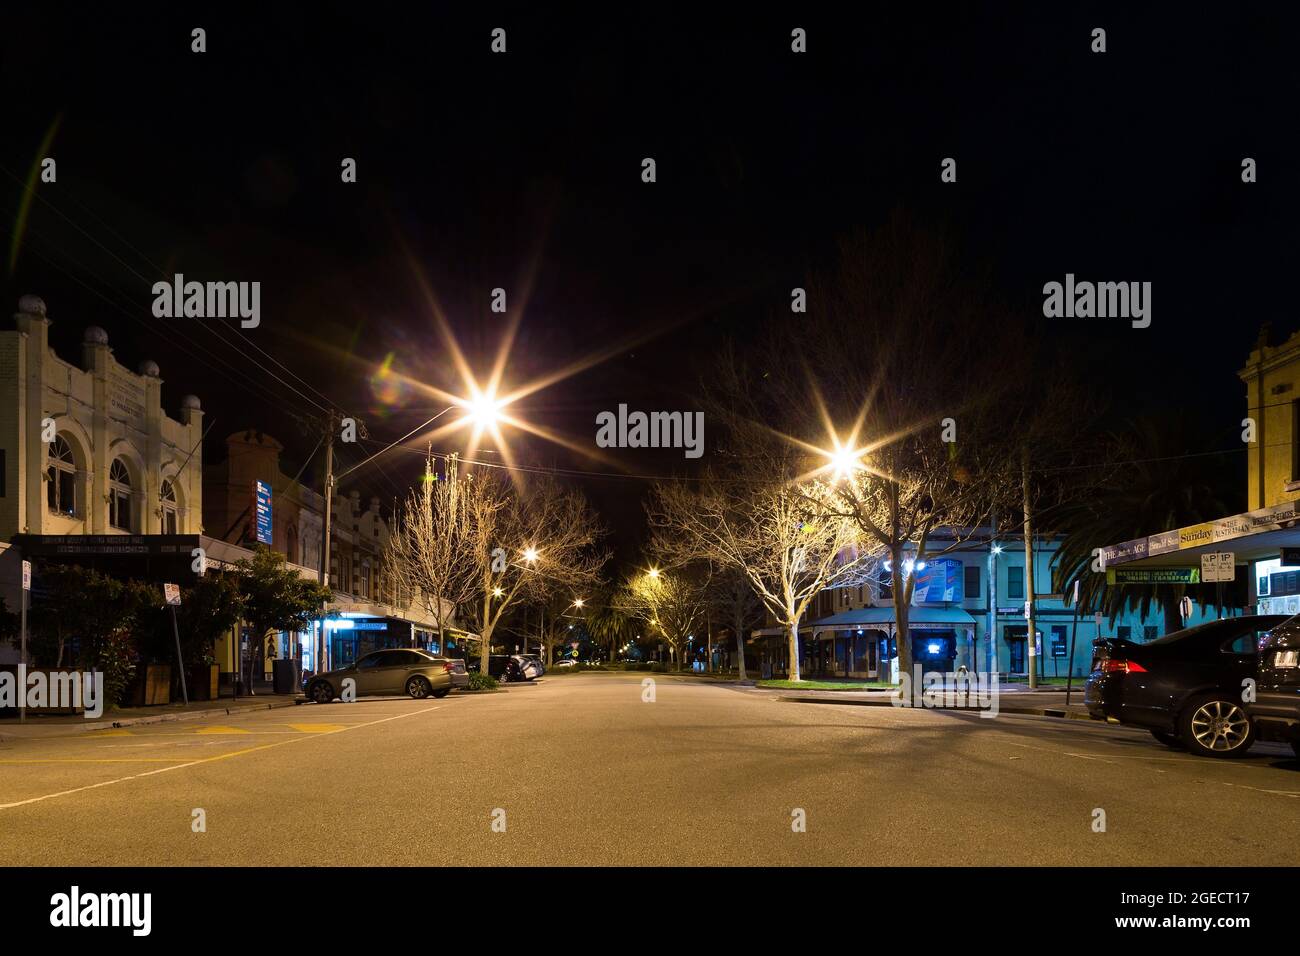 Melbourne, Australia, 26 August, 2020. Melbourne under curfew, a city devoid of life. A view of Armstrong Street, Middle Park. Credit: Dave Hewison/Speed Media/Alamy Live News Stock Photo